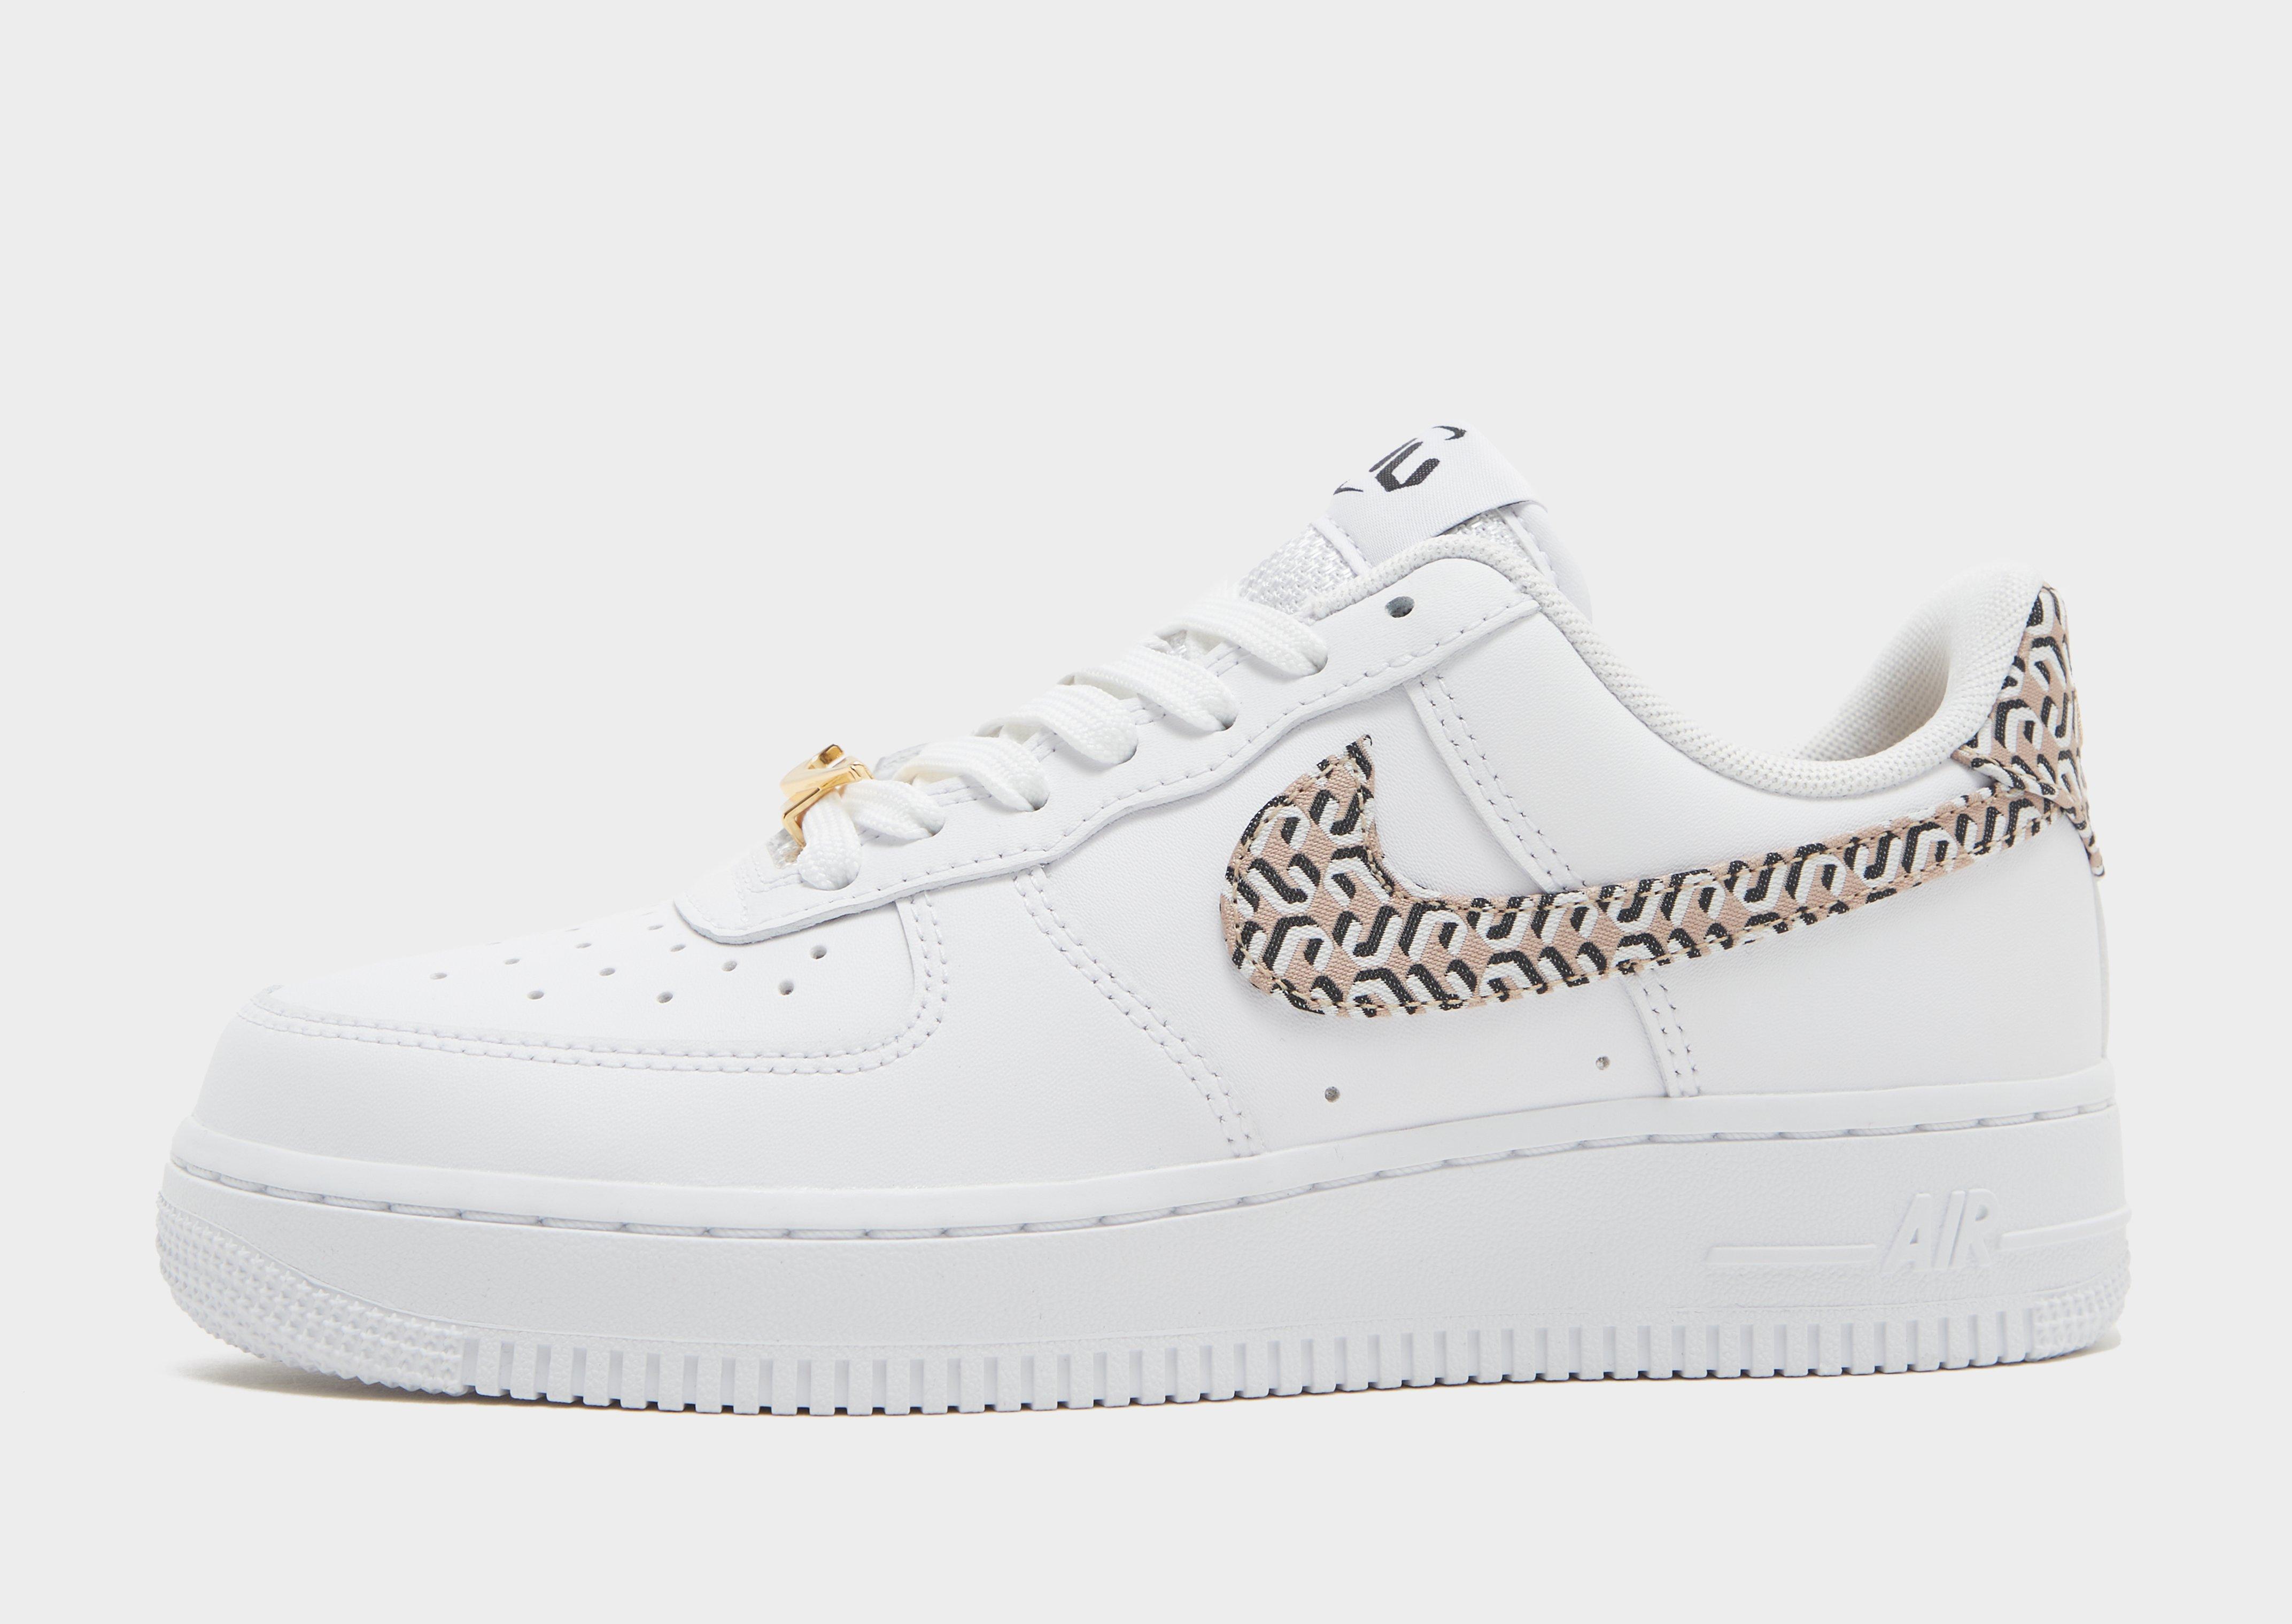 Nike Air Force 1 '07 LX Low Women's